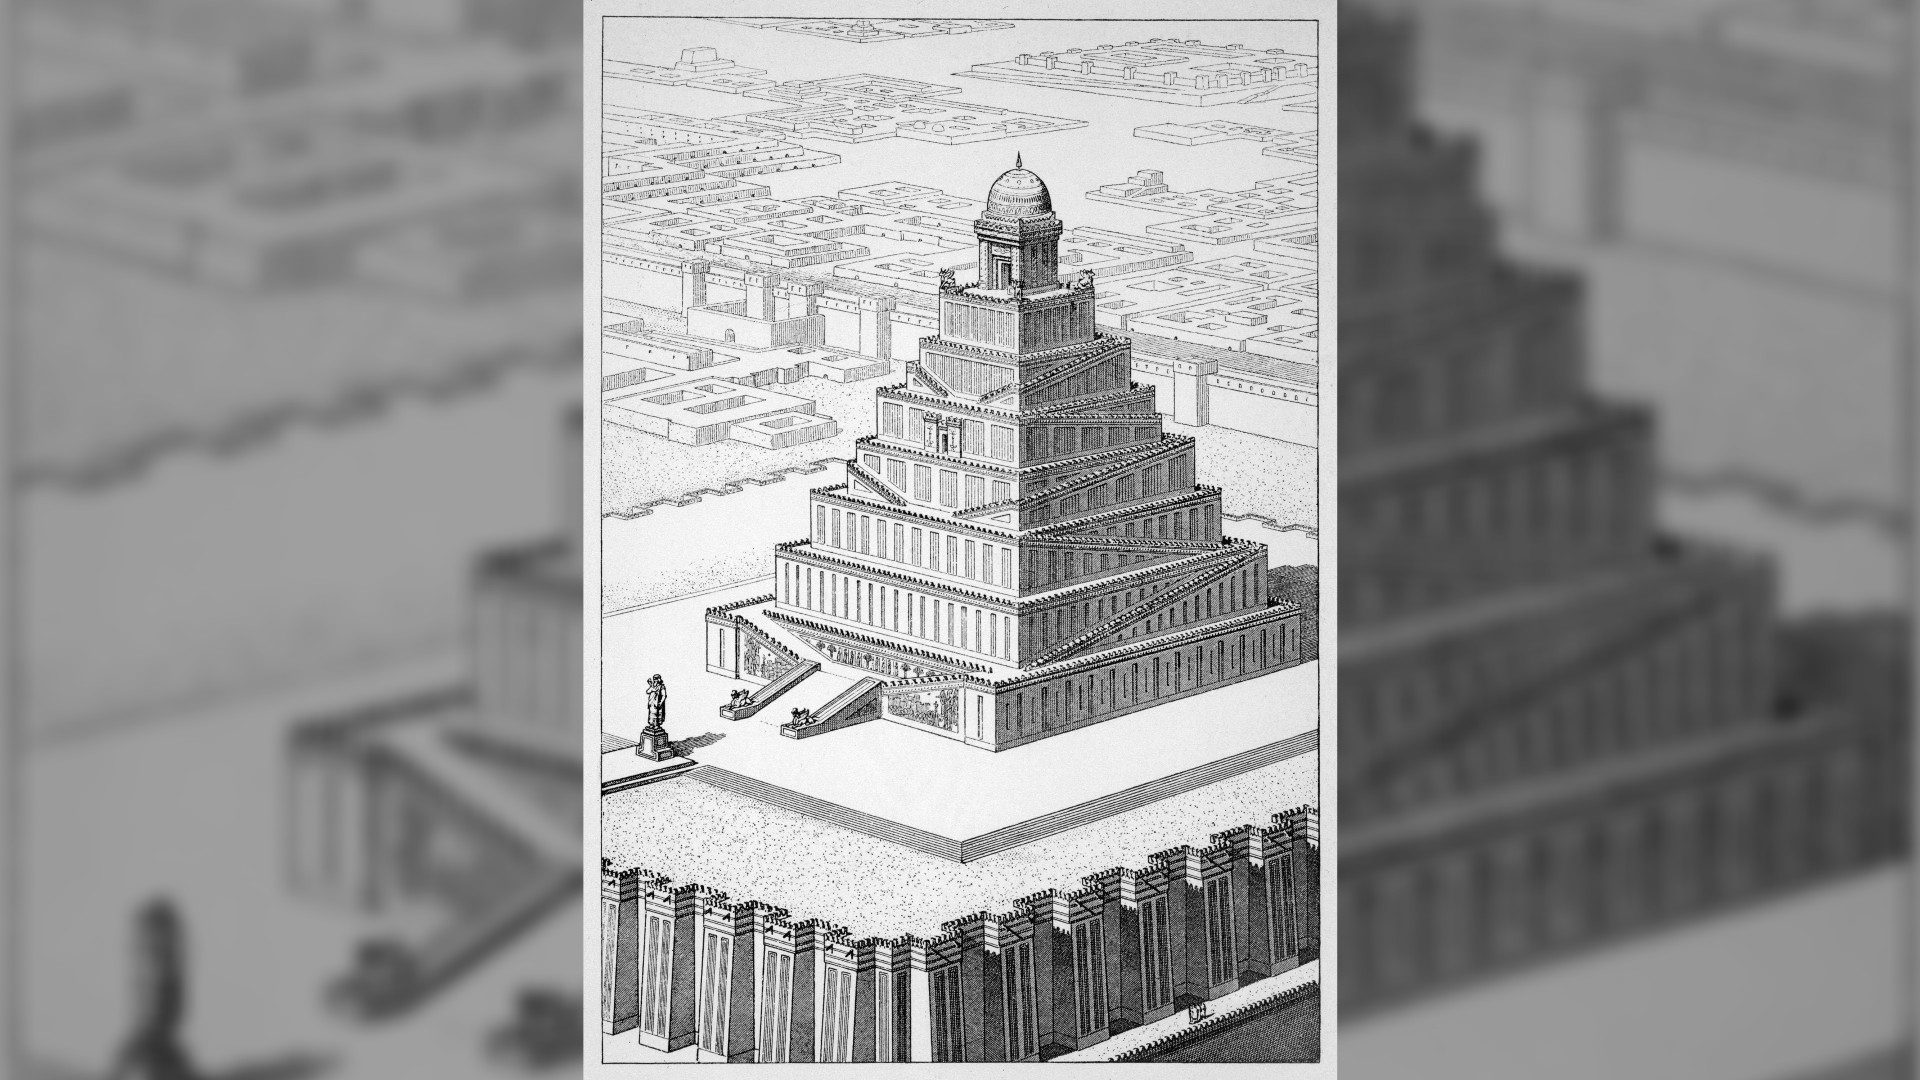 The Ziggurat of Marduk or 'Etemenanki' (the fabled 'Tower of Babel') bravely reconstructed here by Chipiez. Due to quarrying the site is now a large hole. Date: 1902. It looks like a 7 layer step pyramid with a small domed building on top.